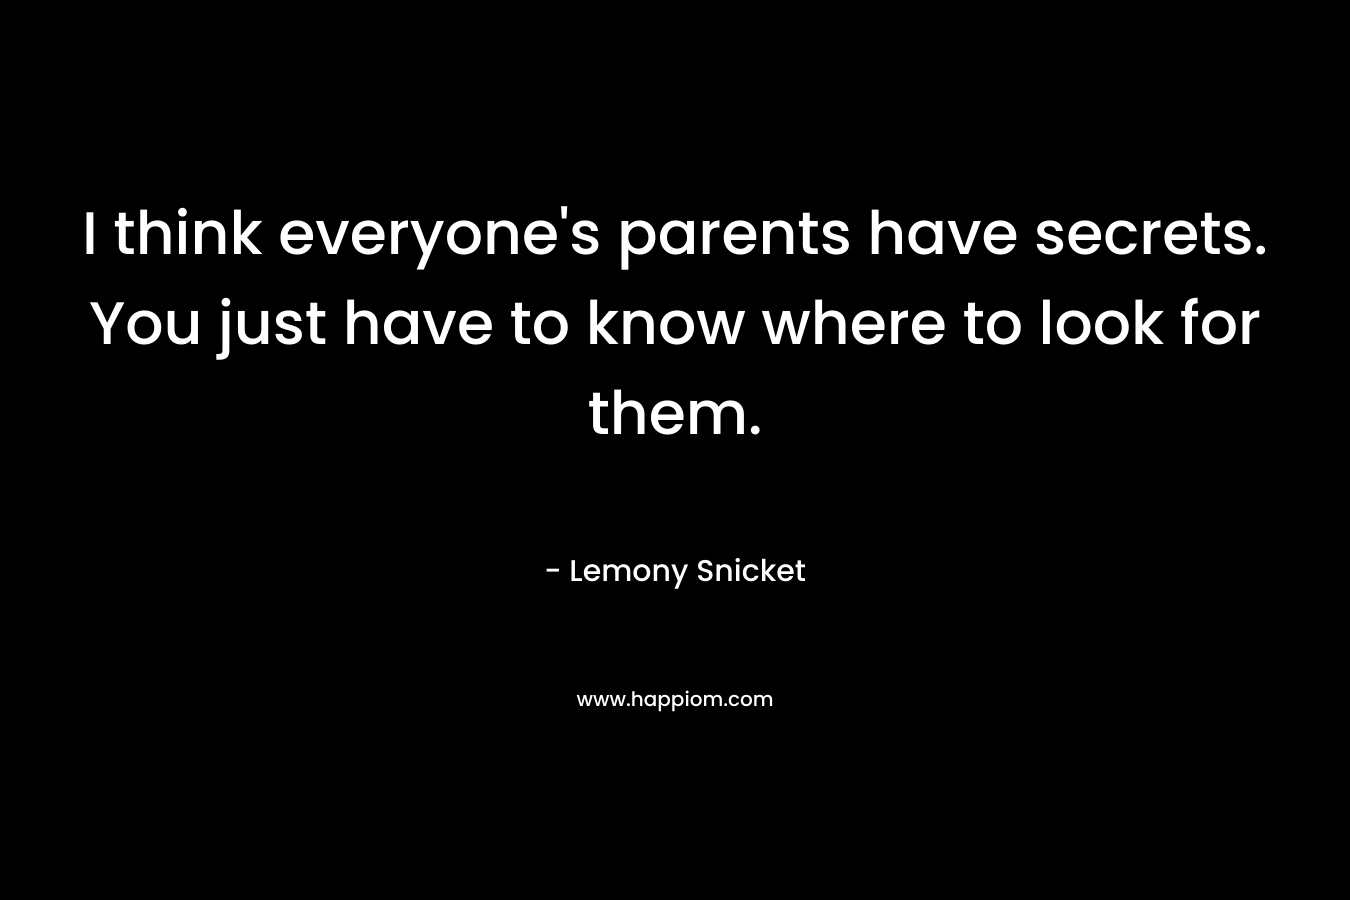 I think everyone's parents have secrets. You just have to know where to look for them.